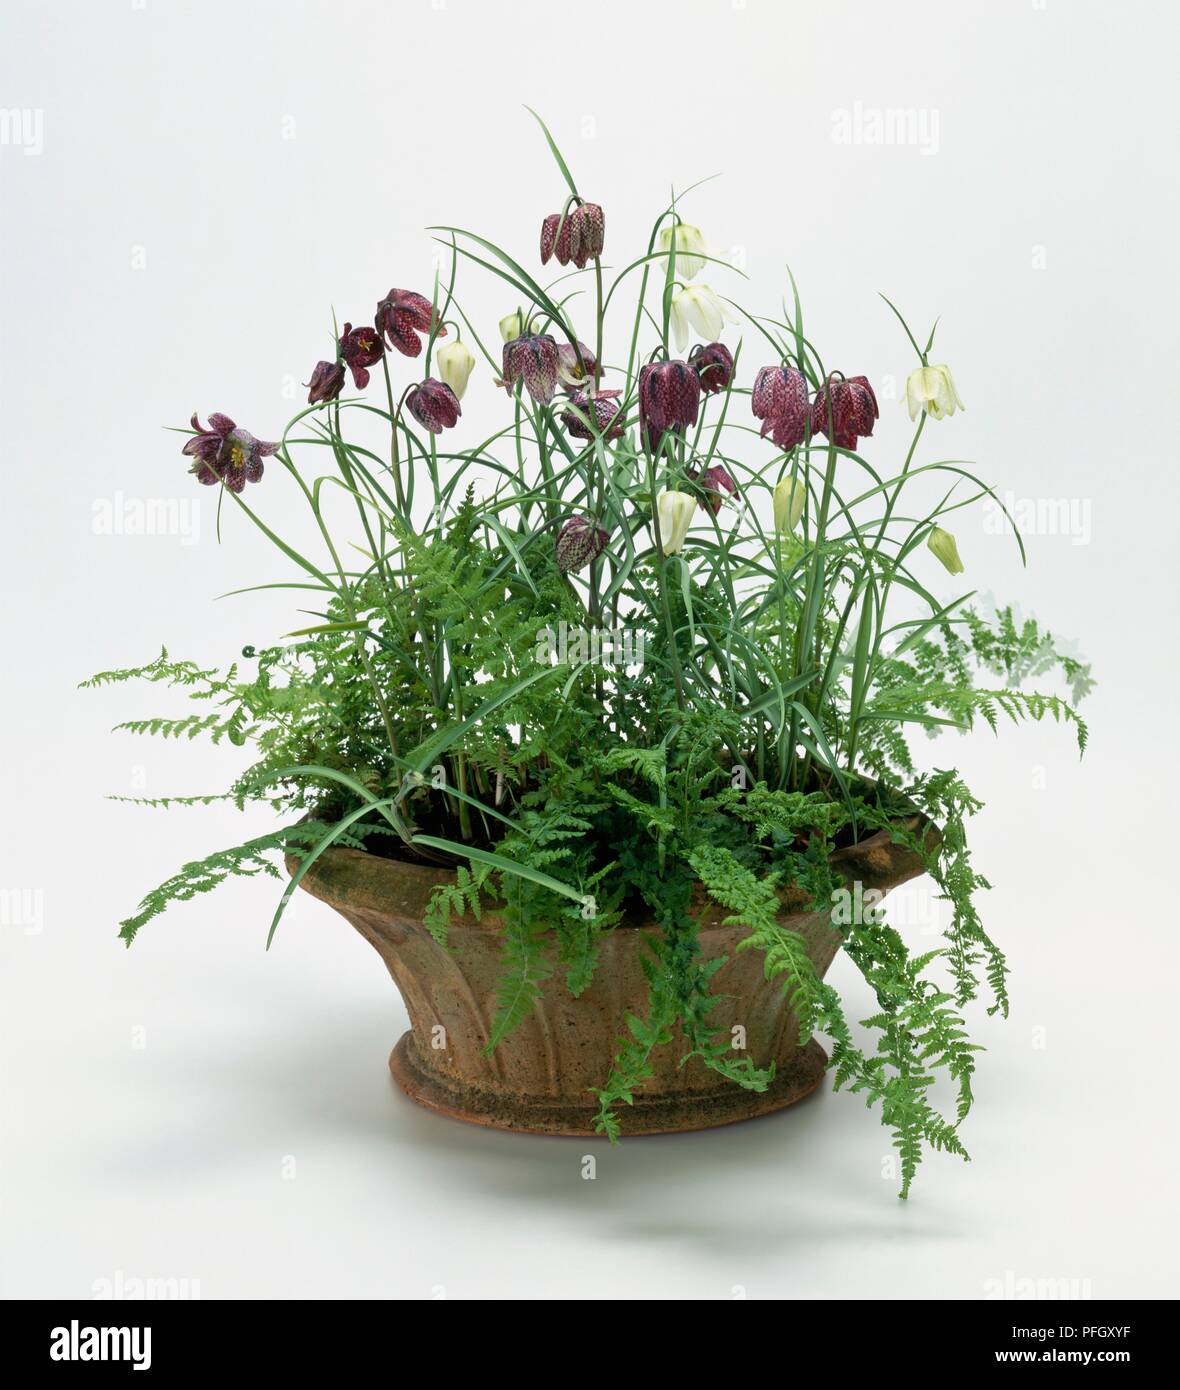 Pot filled with flowers from Fritillaria meleagris (Snake's head fritillary), and fern leaves from Polypodium vulgare 'Cornubiense' (Polypody) Stock Photo